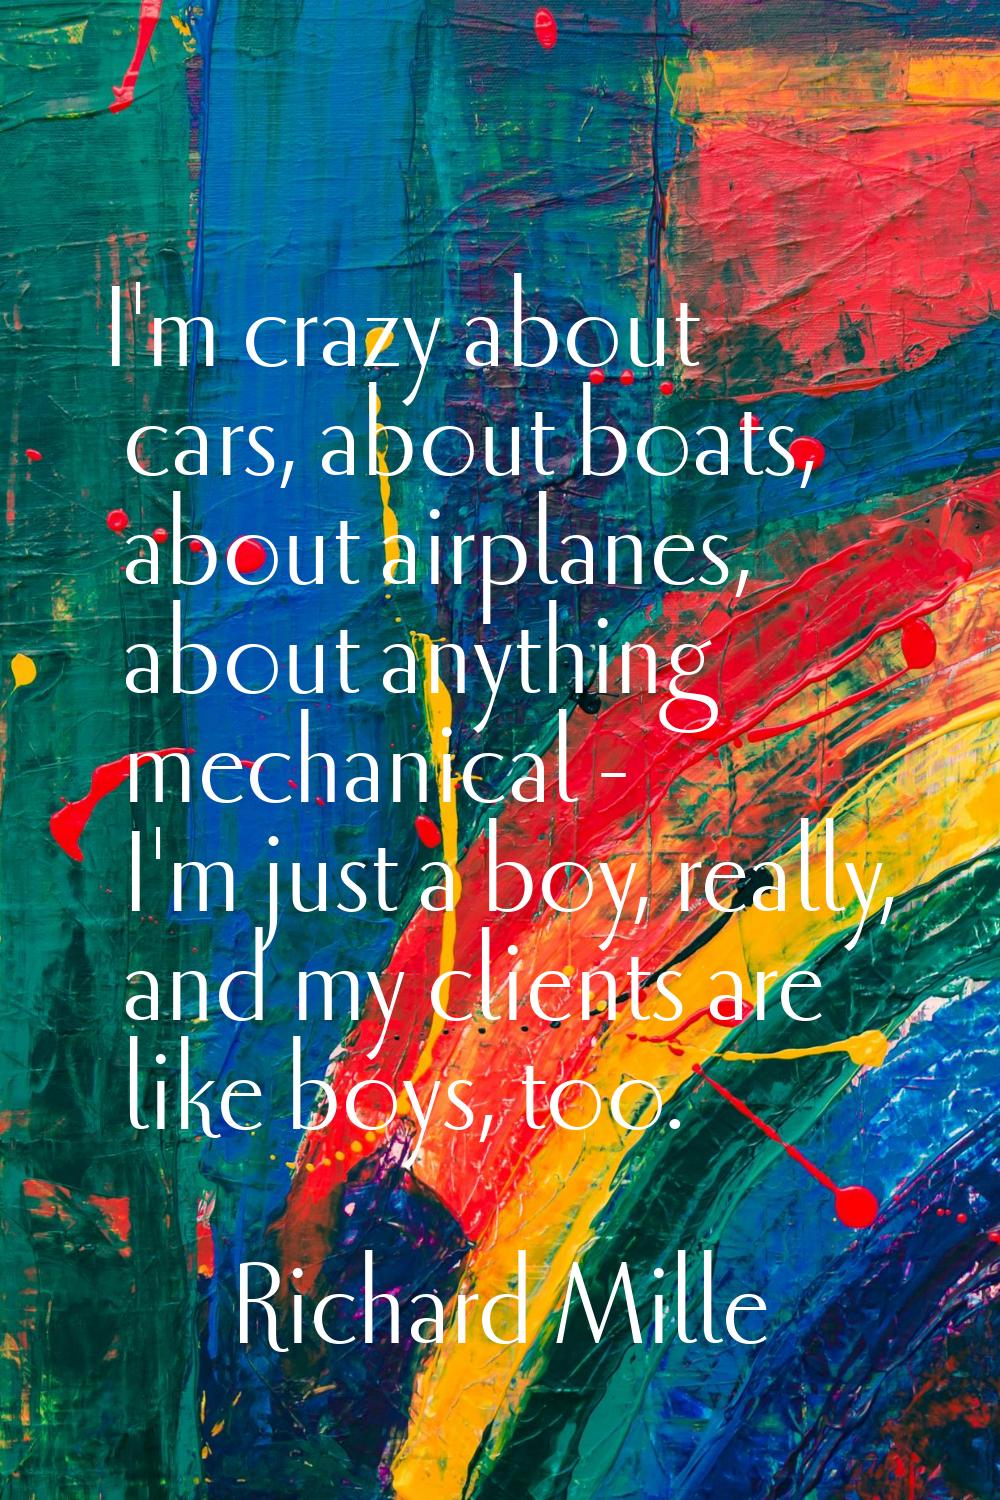 I'm crazy about cars, about boats, about airplanes, about anything mechanical - I'm just a boy, rea